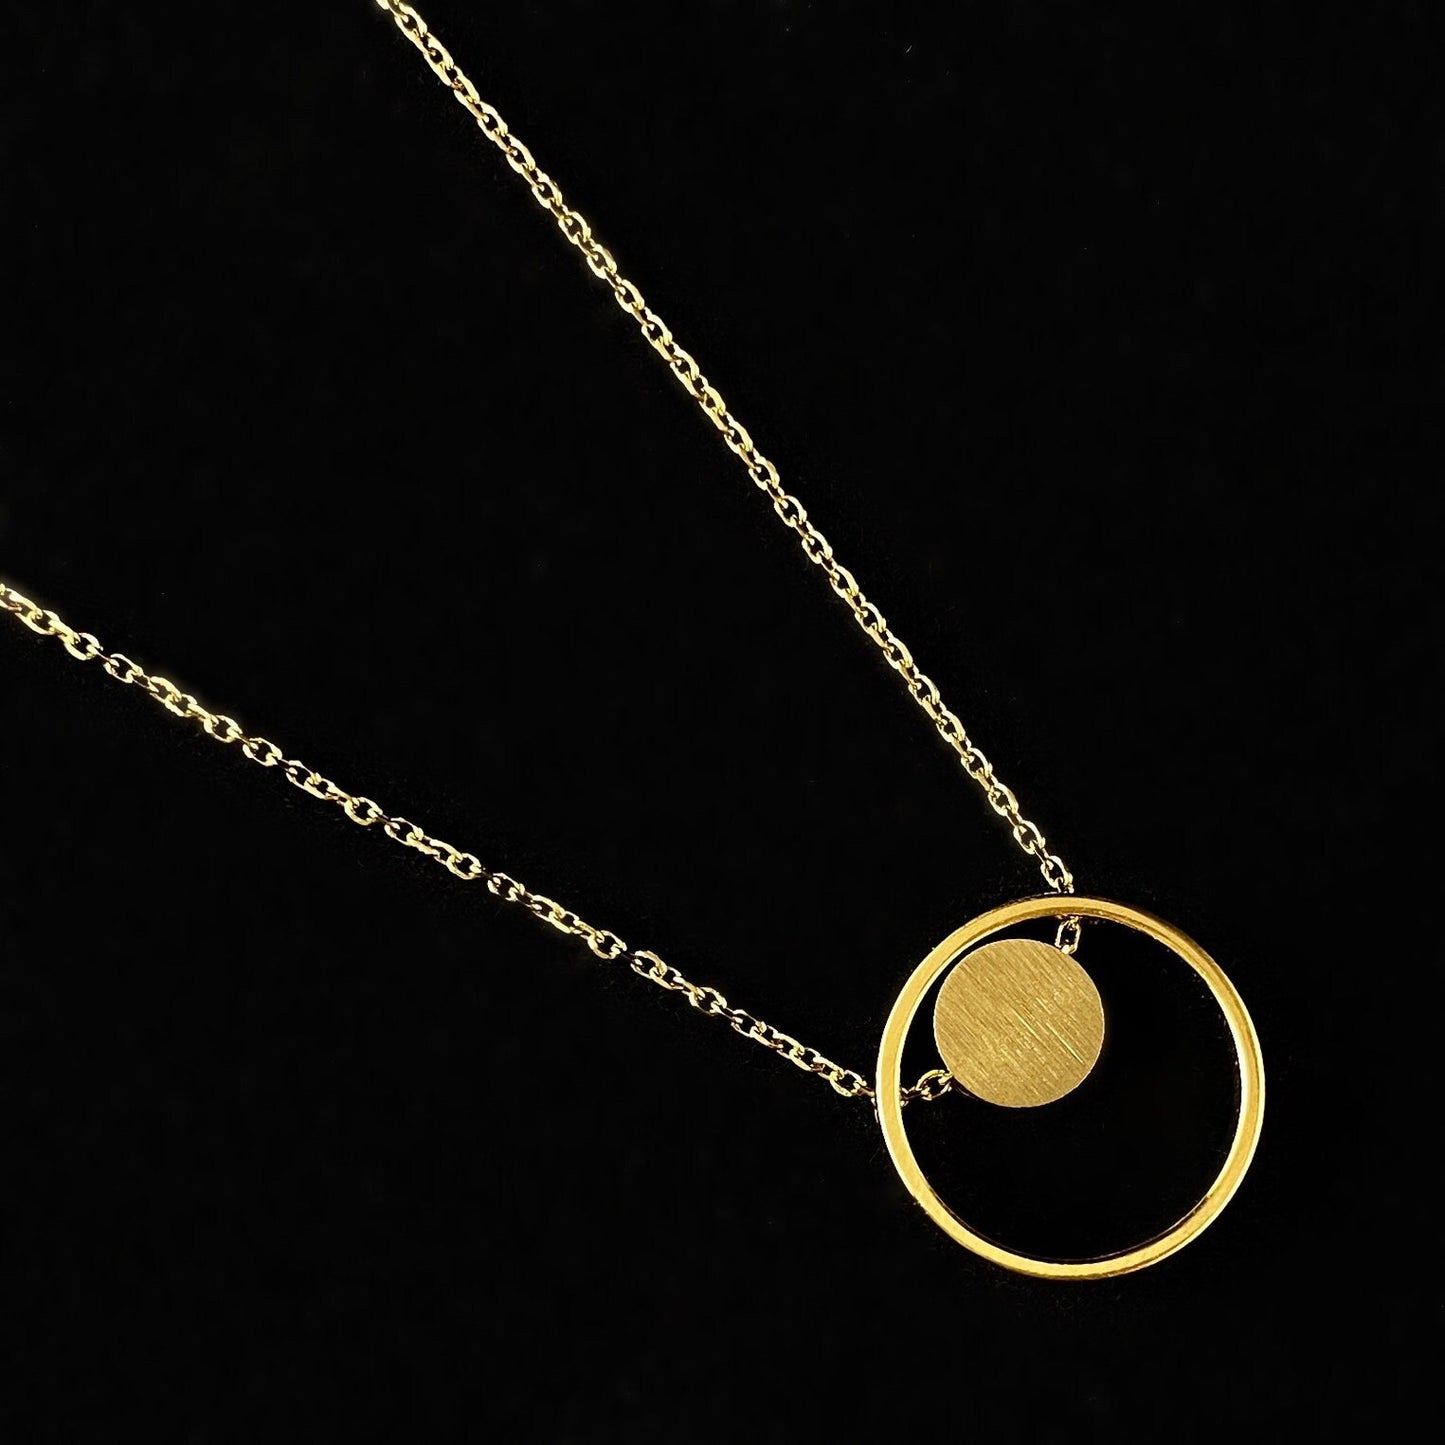 Dainty Gold Moonglow Pendant Necklace - Sabrina